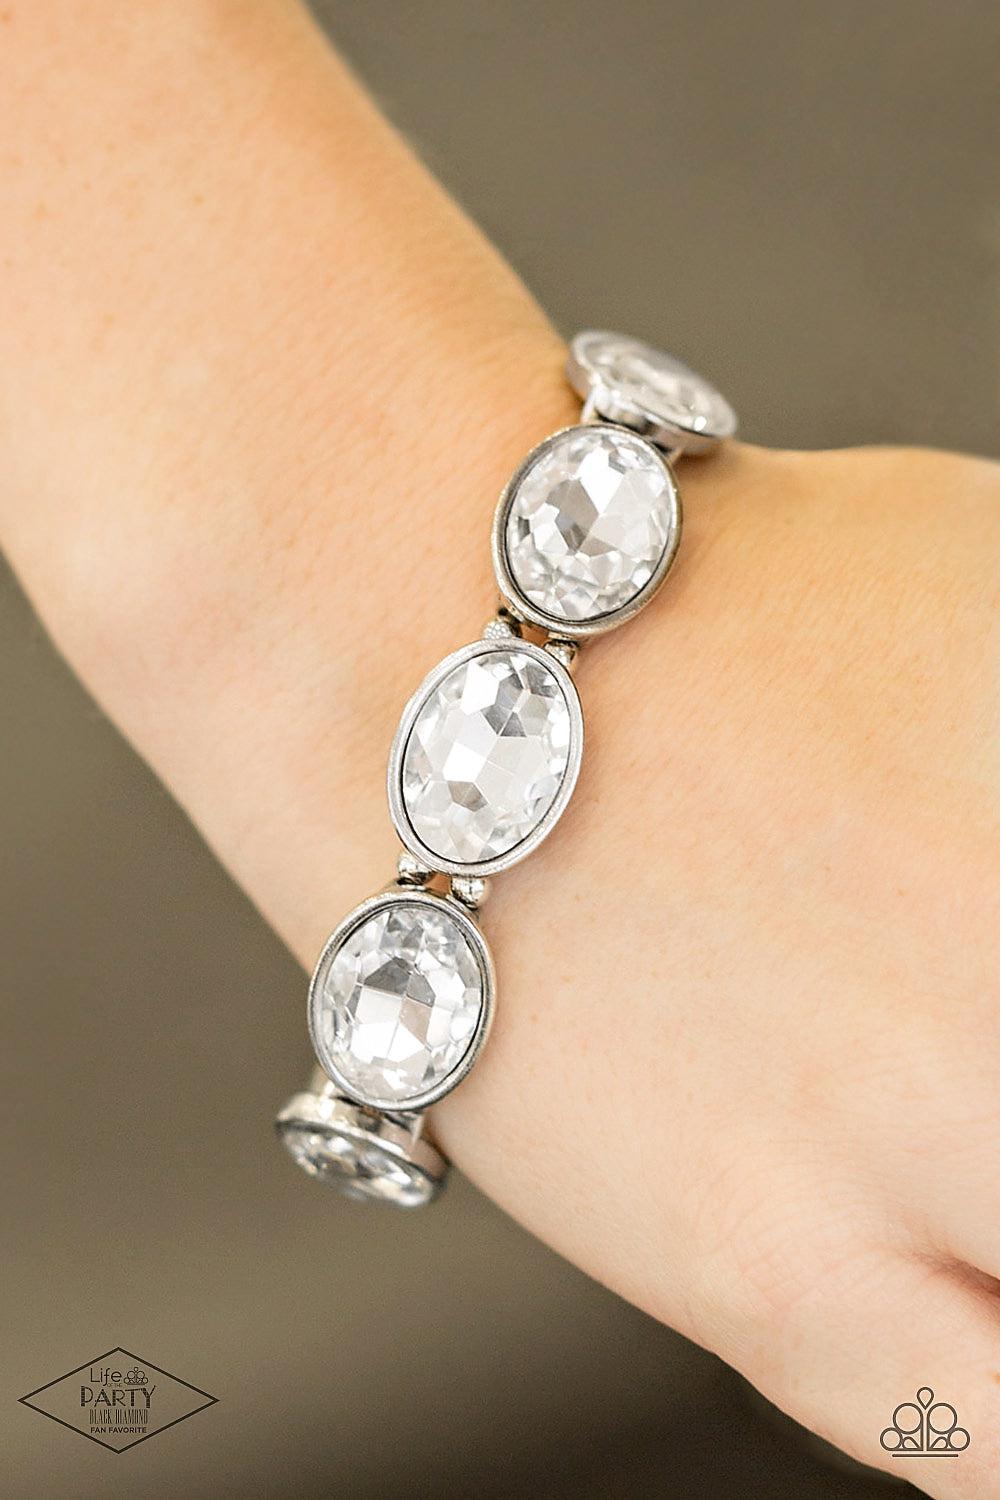 DIVA In Disguise White Rhinestone Bracelet - Paparazzi Accessories-on model - CarasShop.com - $5 Jewelry by Cara Jewels